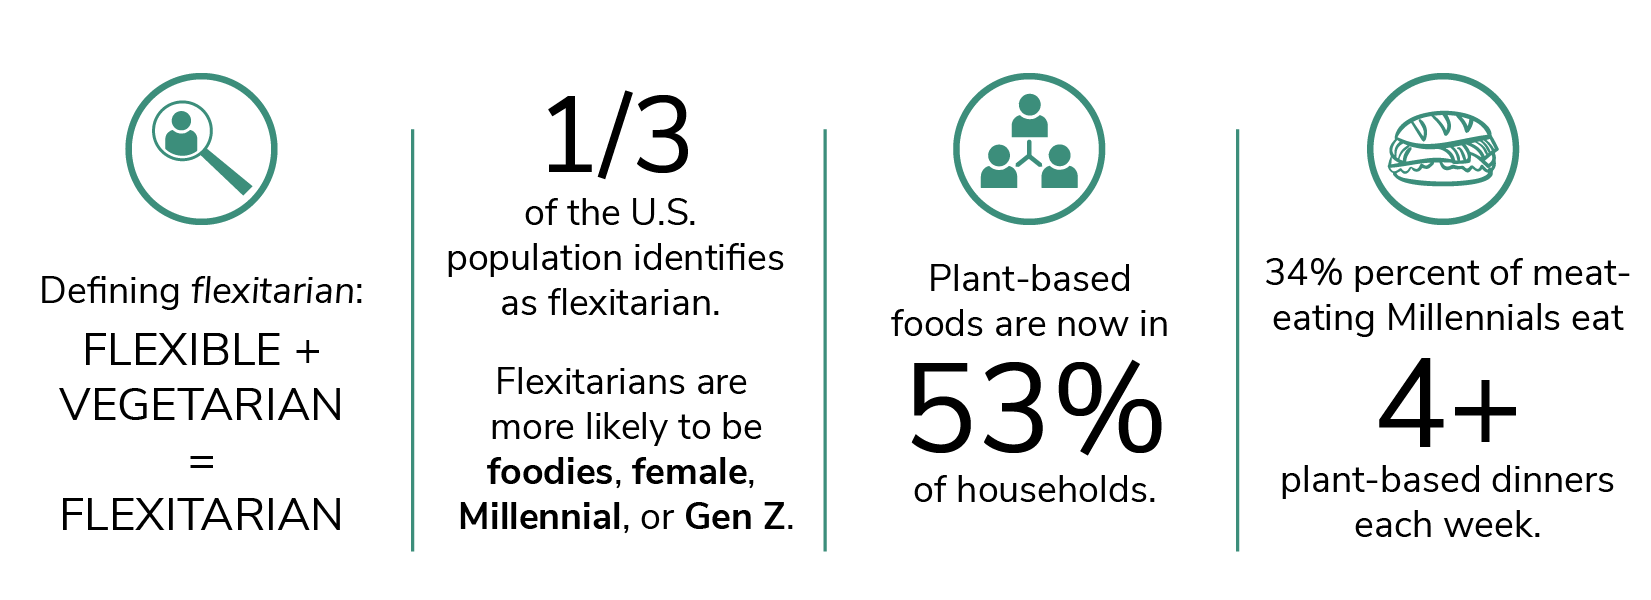 Graphic of flexitarian, millennial, demographic, household, and behavior stats for plant-based foods.